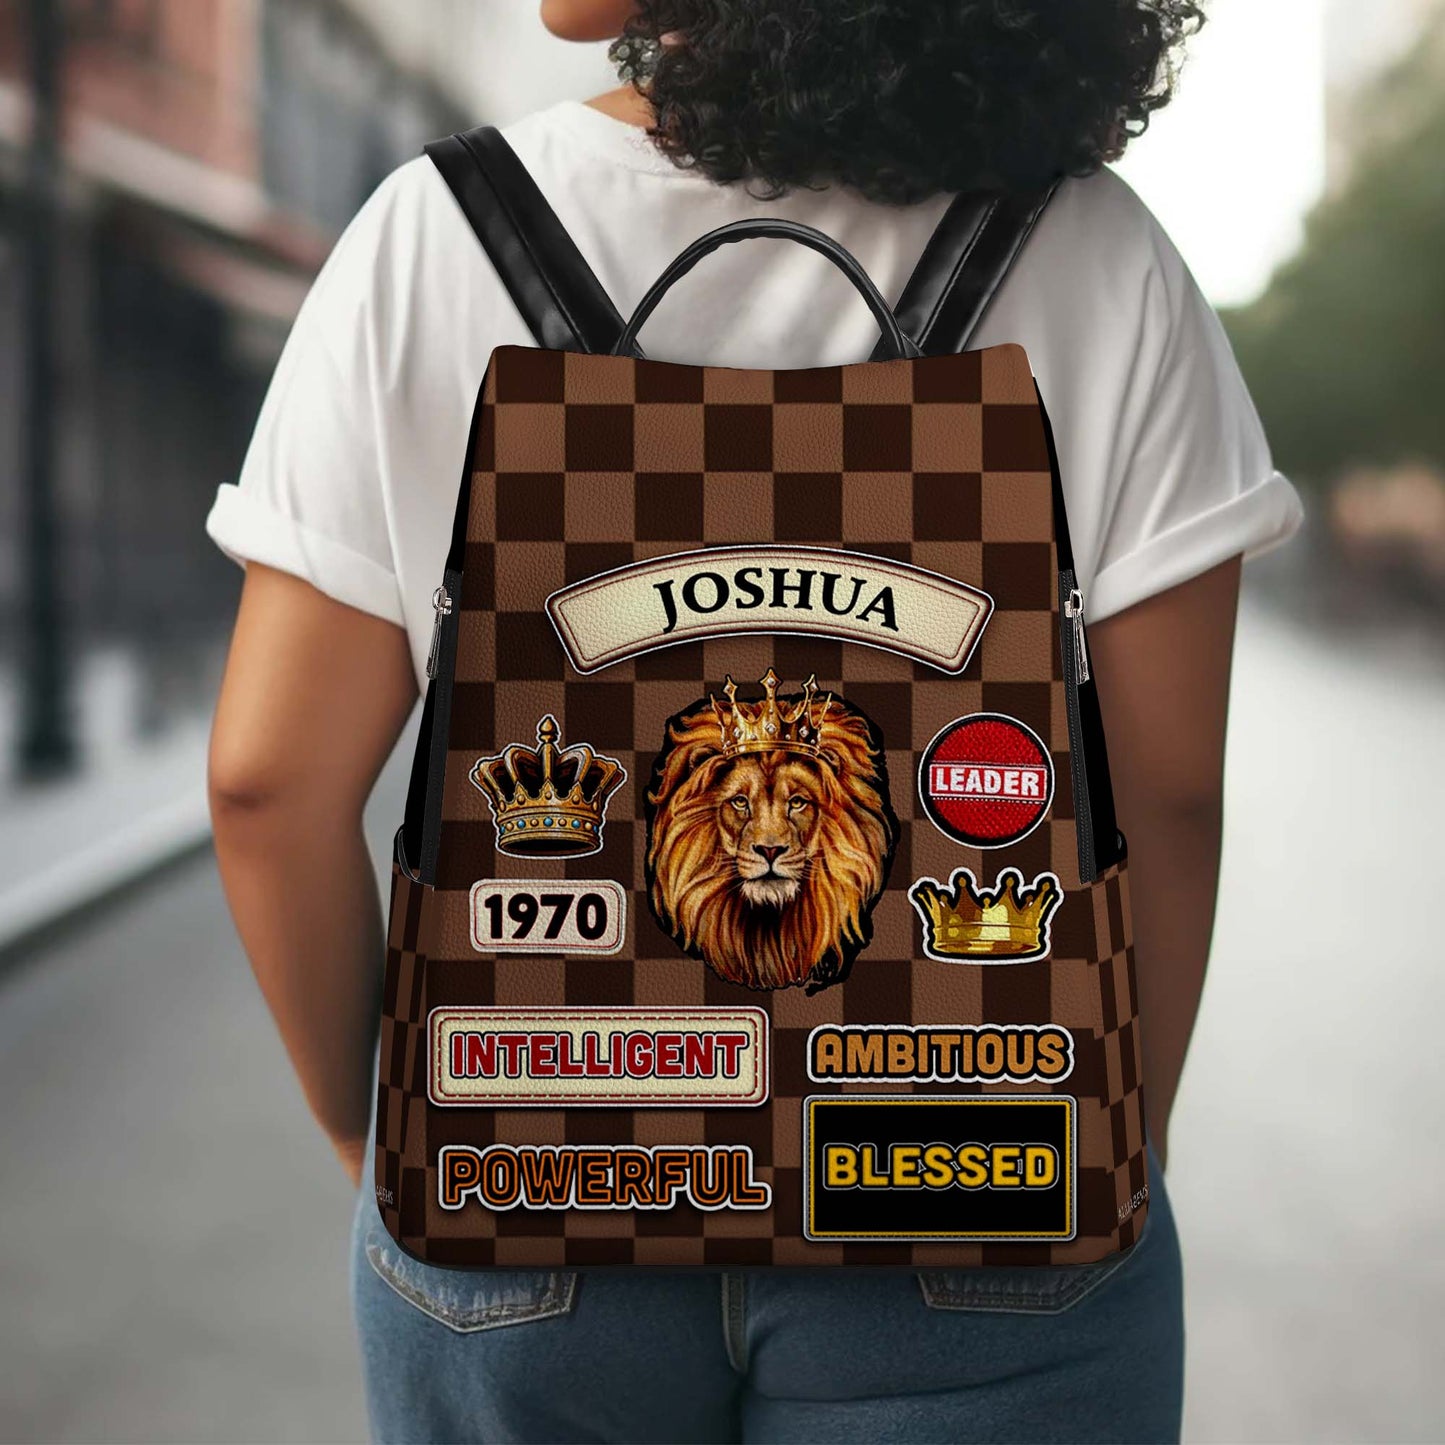 Powerful Leader Intelligent Ambitious Blessed - Personalized Leather BackPack - BP_K06